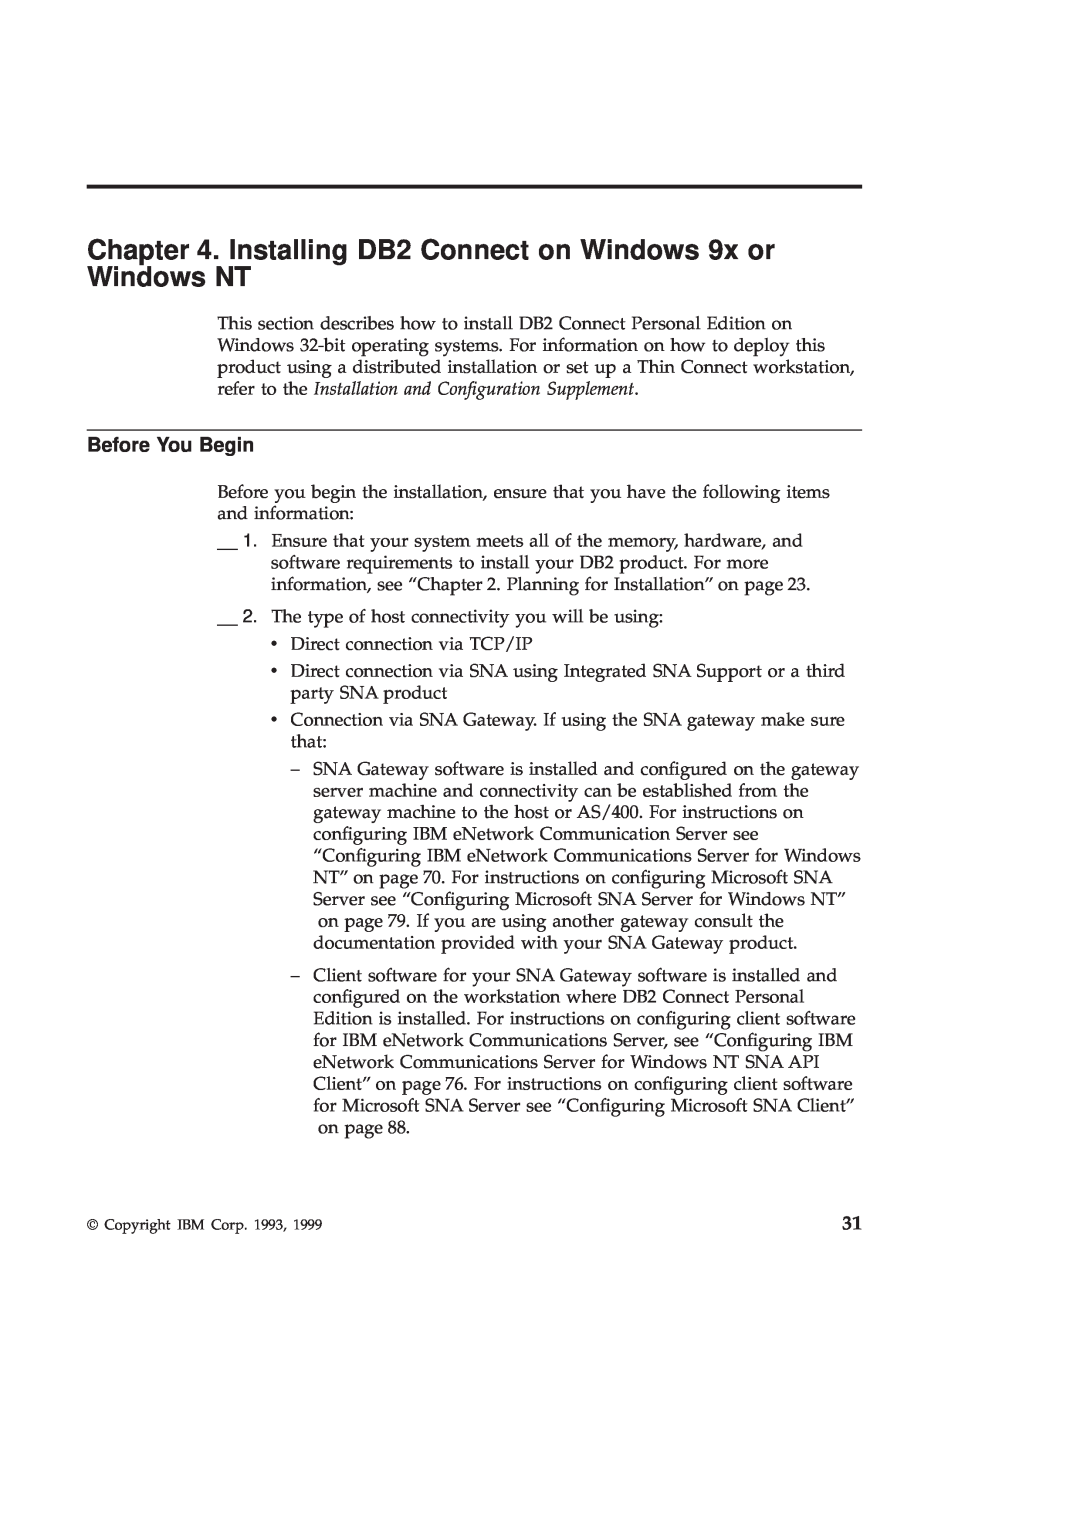 IBM GC09-2830-00 manual Installing DB2 Connect on Windows 9x or Windows NT, Before You Begin 